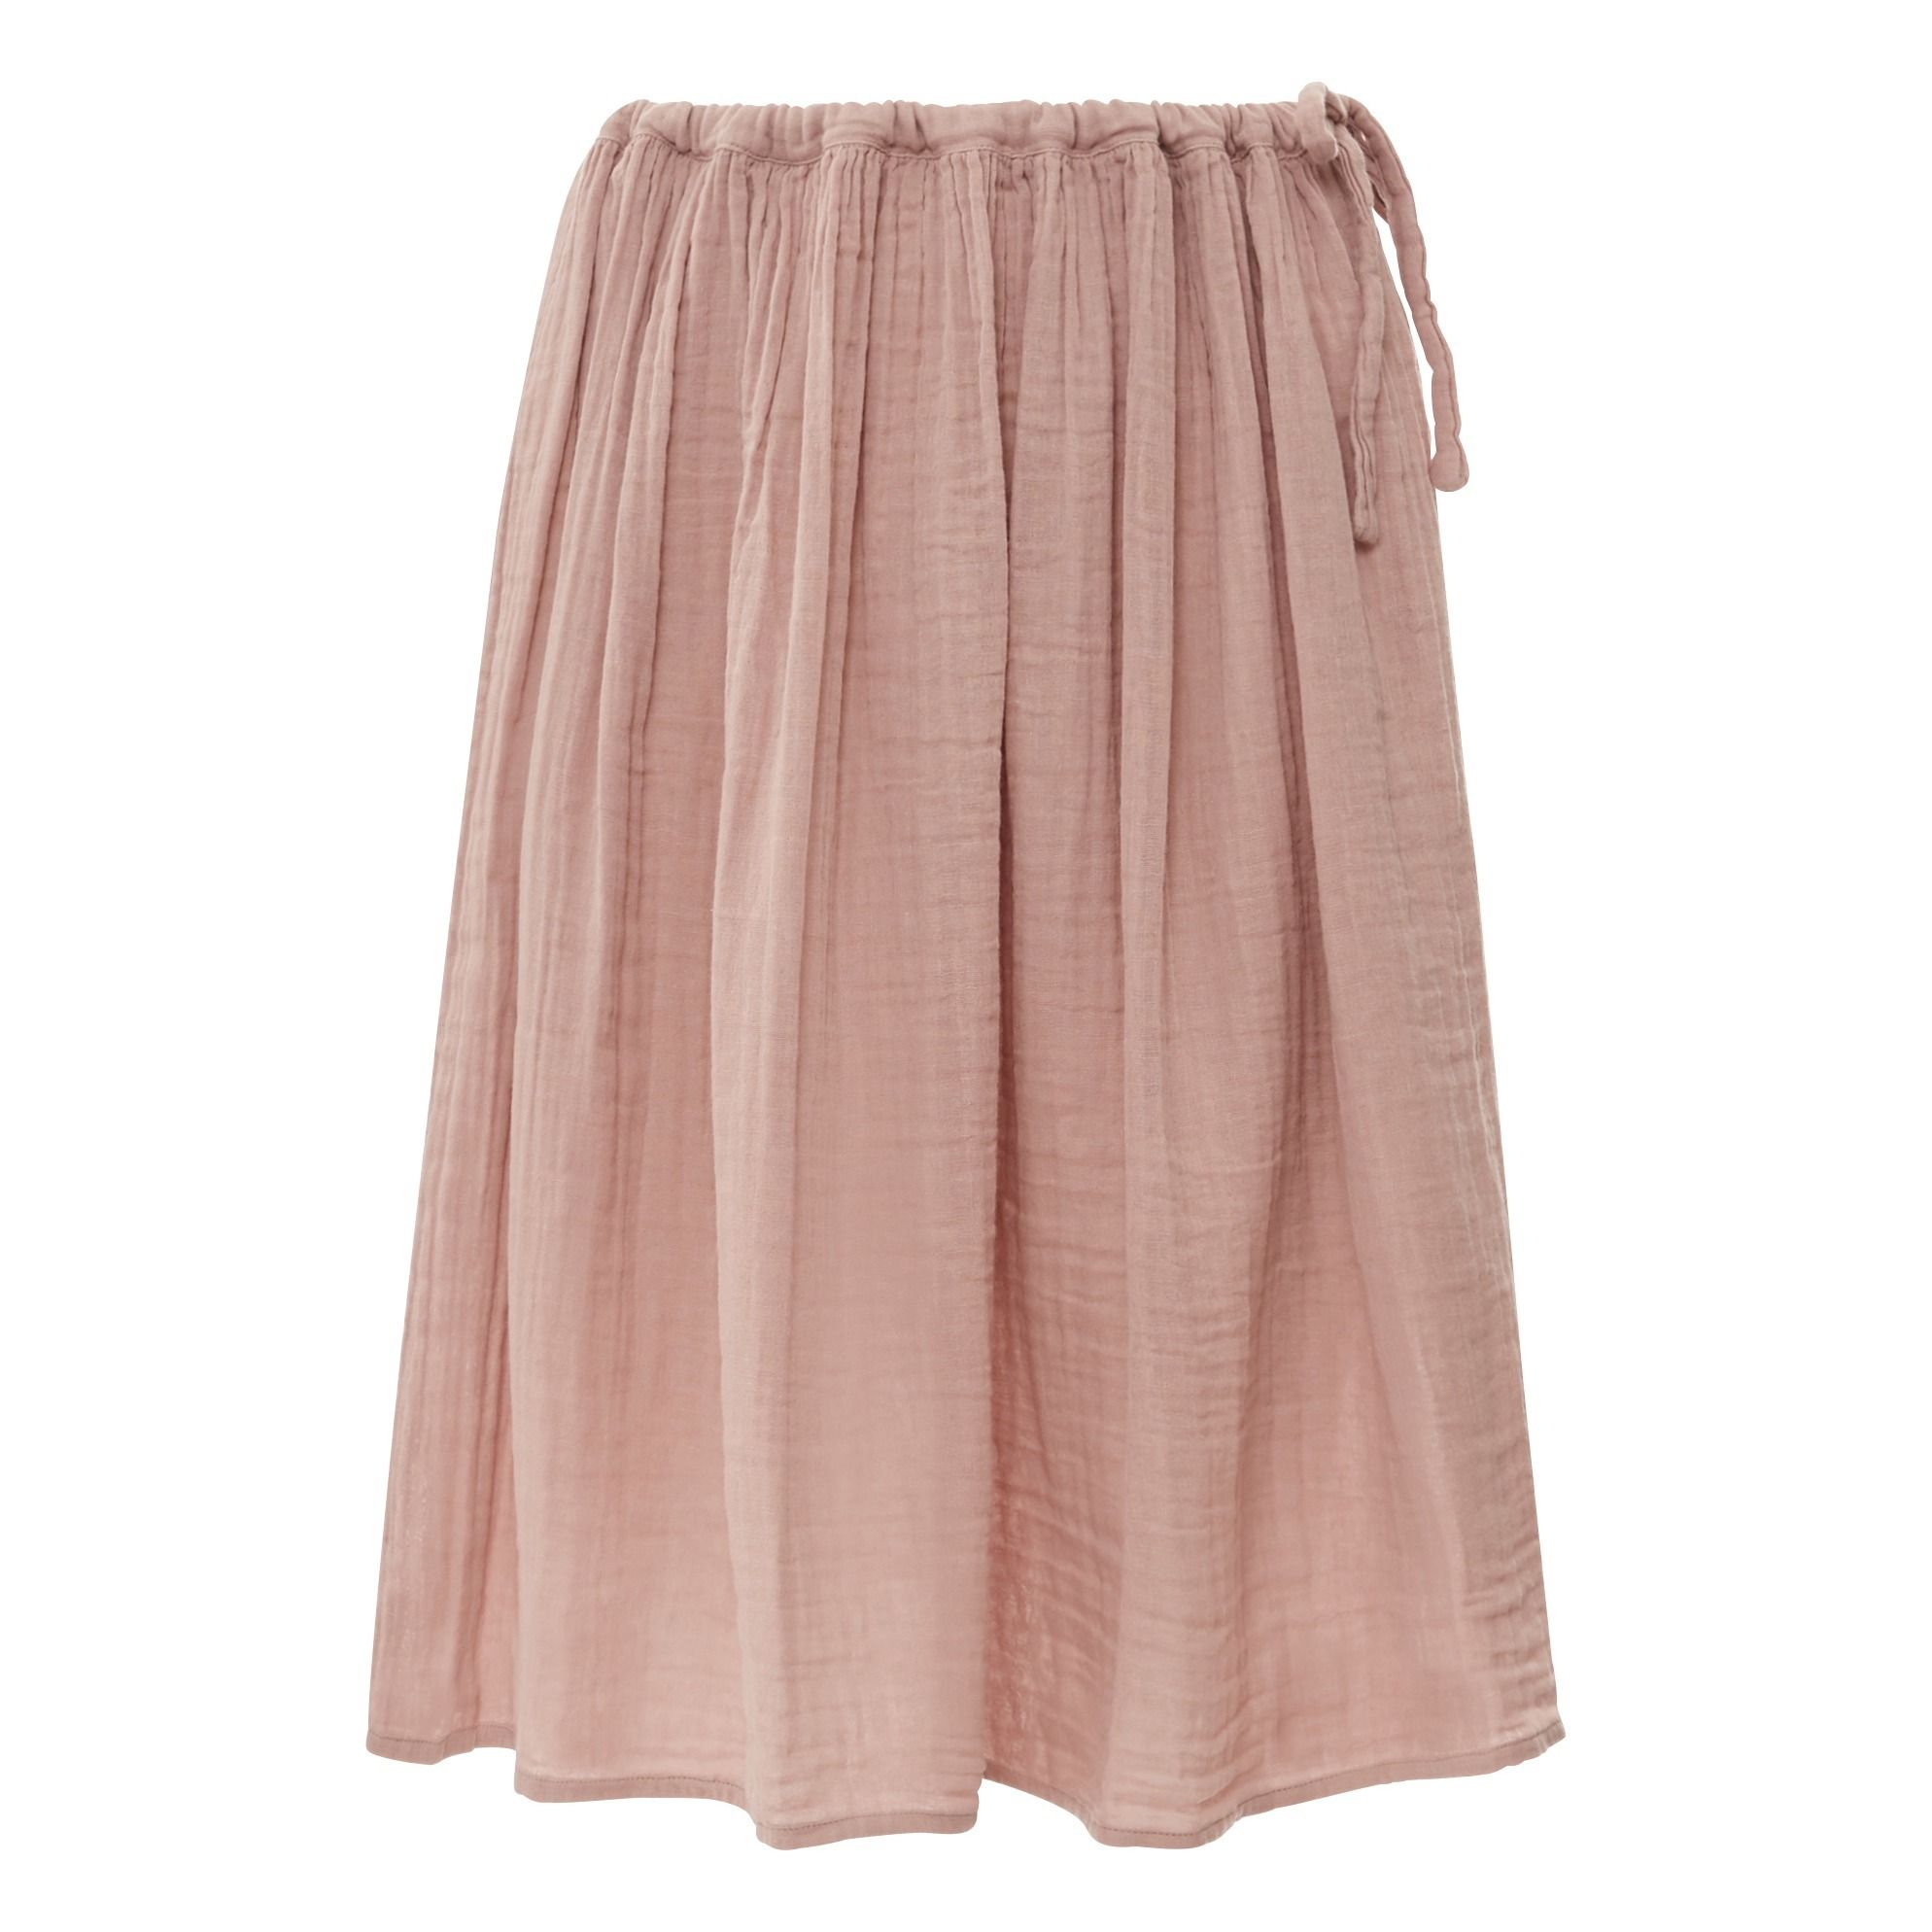 Numero 74 - Jupe Courte Ava - Collection Femme - - Dusty Pink S007